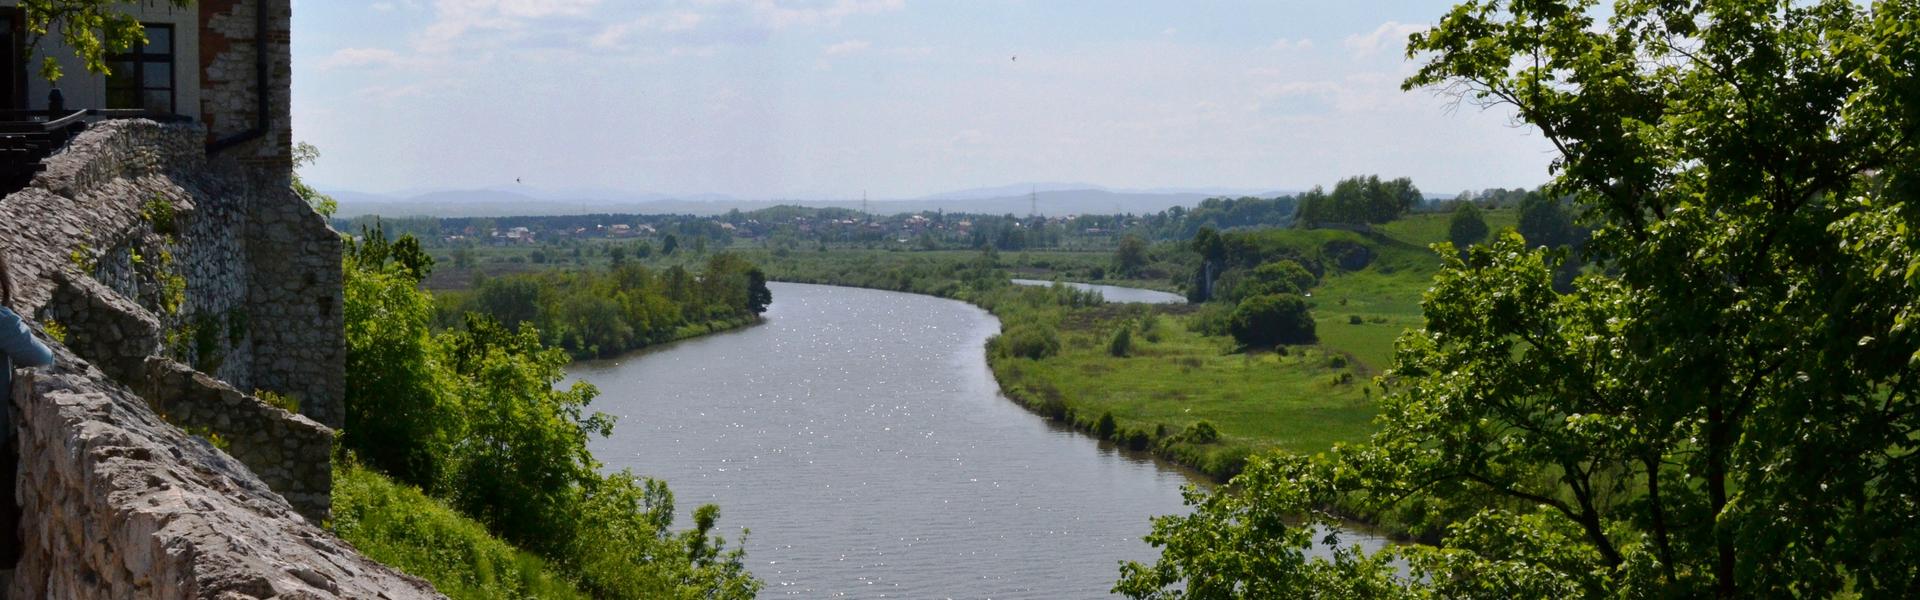 Vistula River as seen from the hill.